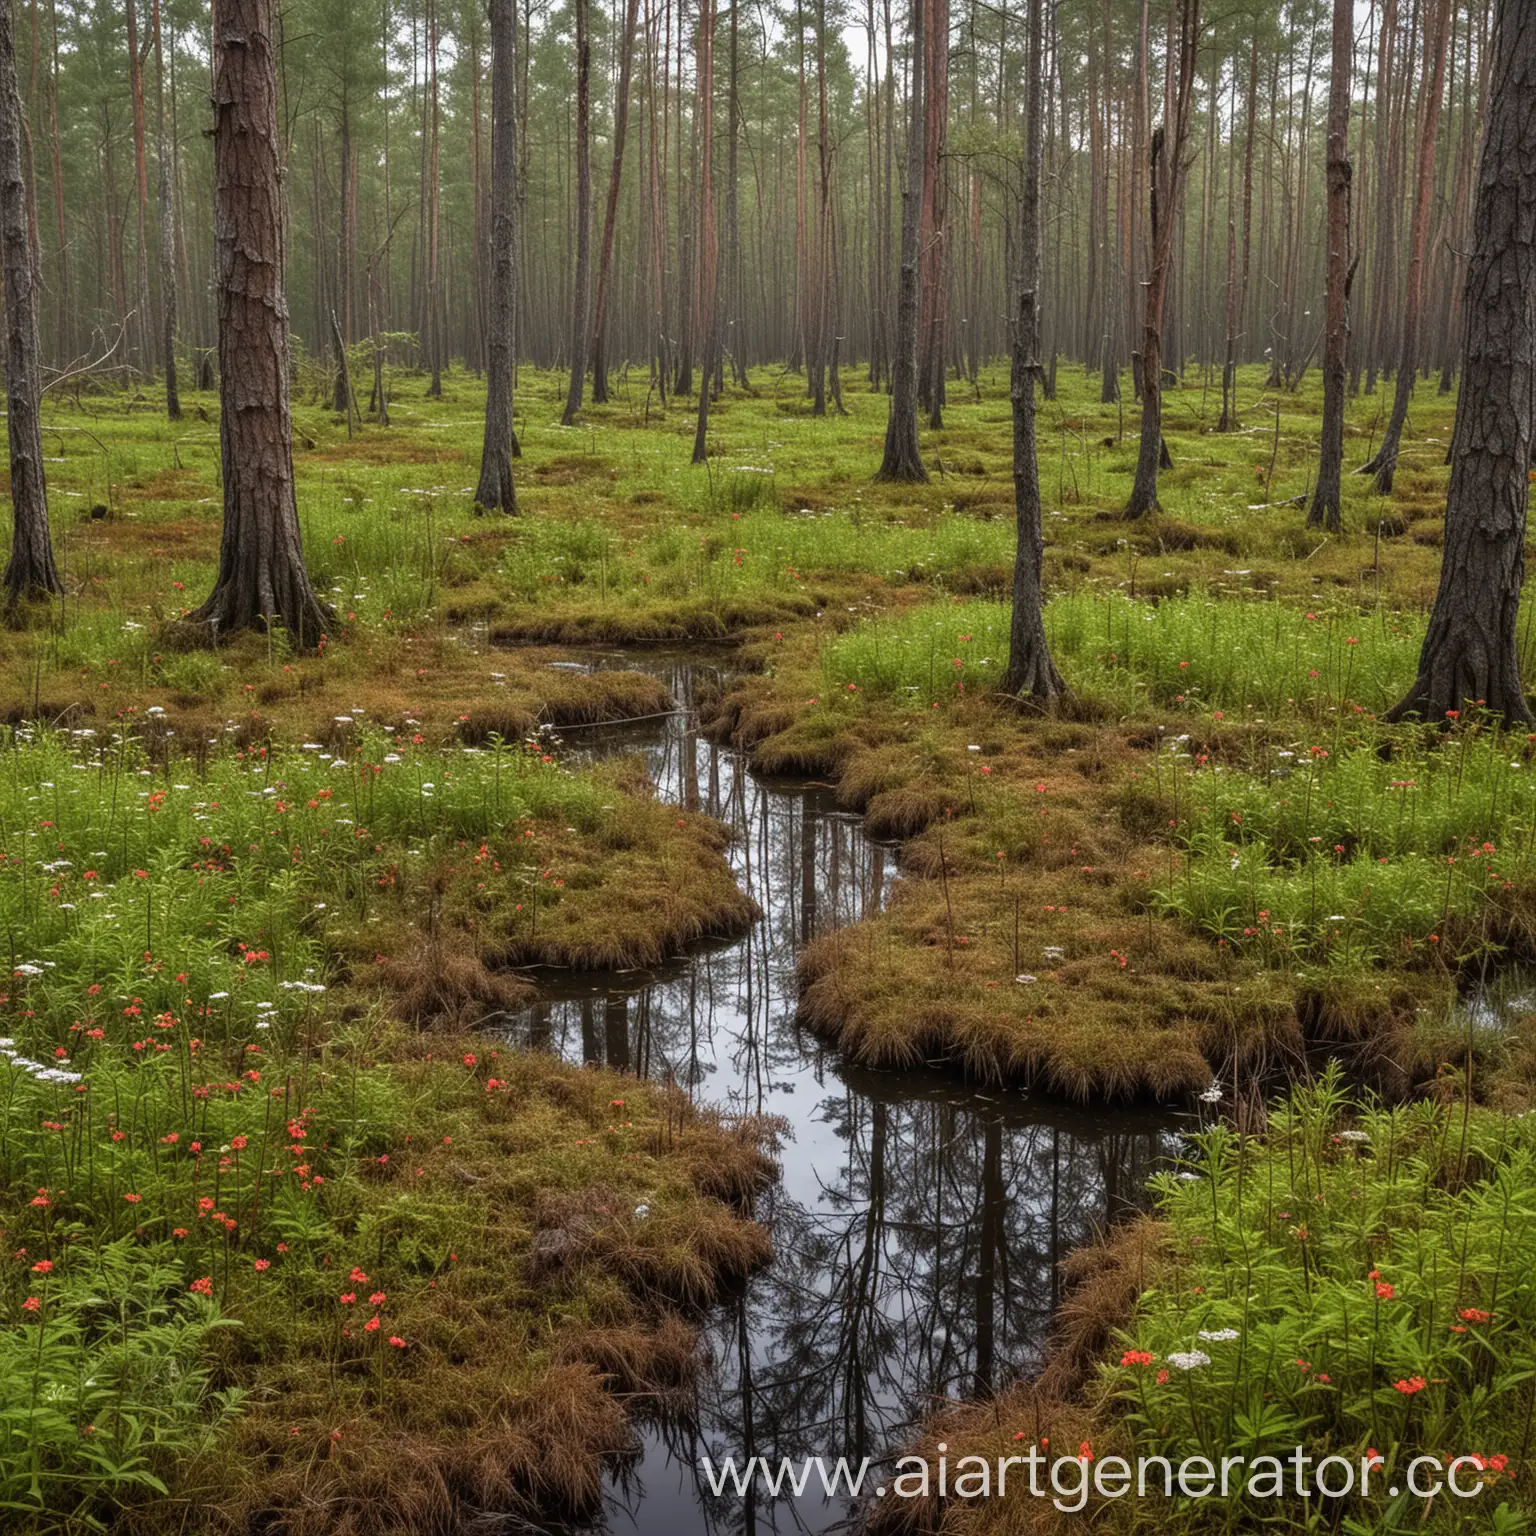 old swamp in the middle of the forest with rotten trees and overgrown with peat moss, wild rosemary and sundew